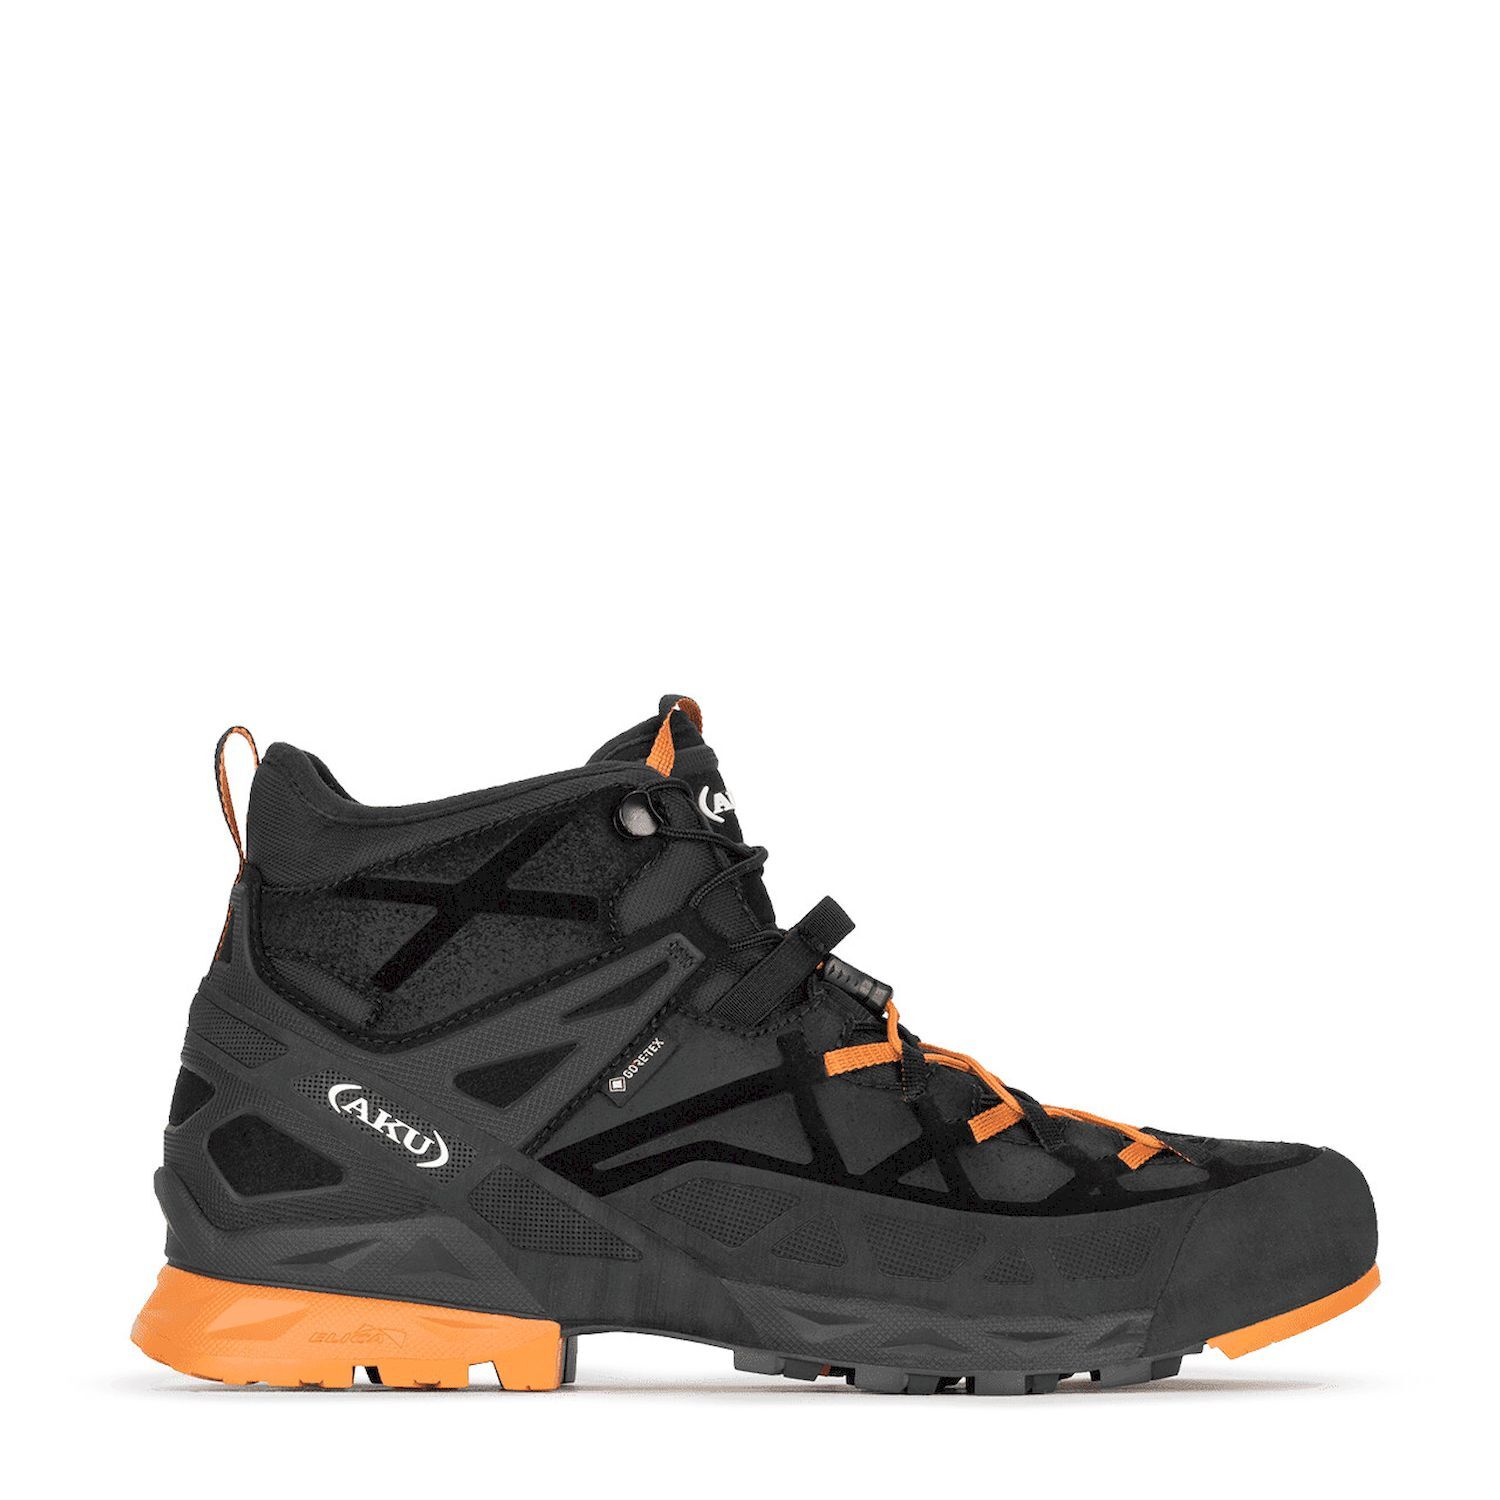 Aku Rock DFS Mid GTX - Chaussures approche homme | Hardloop